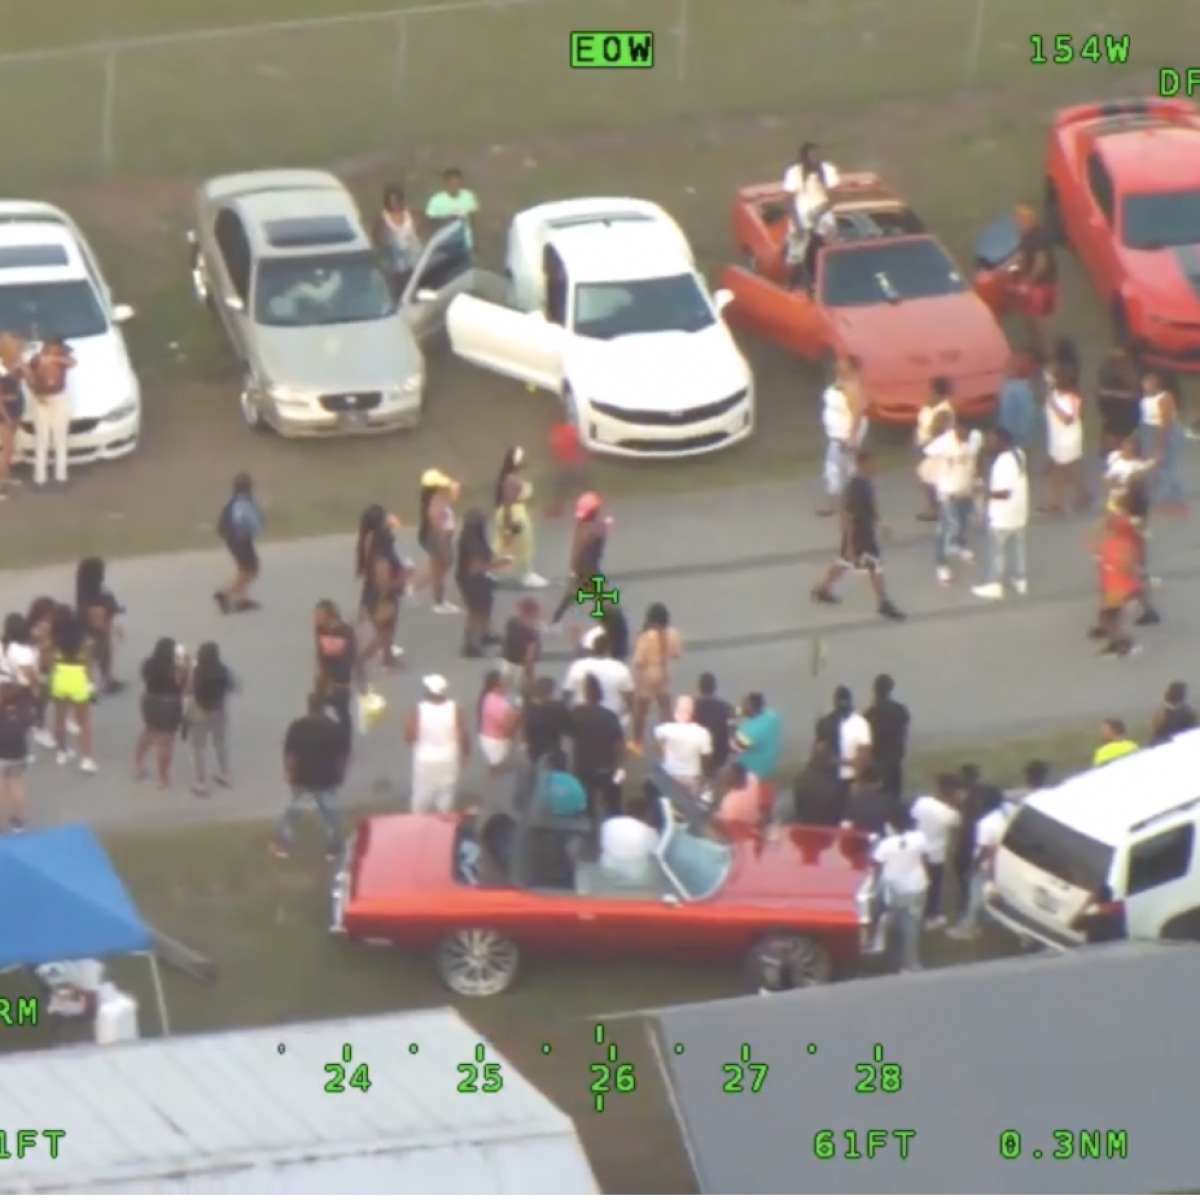 3,000-Person Block Party In Florida Leads To Arrests, Claims Of Racism